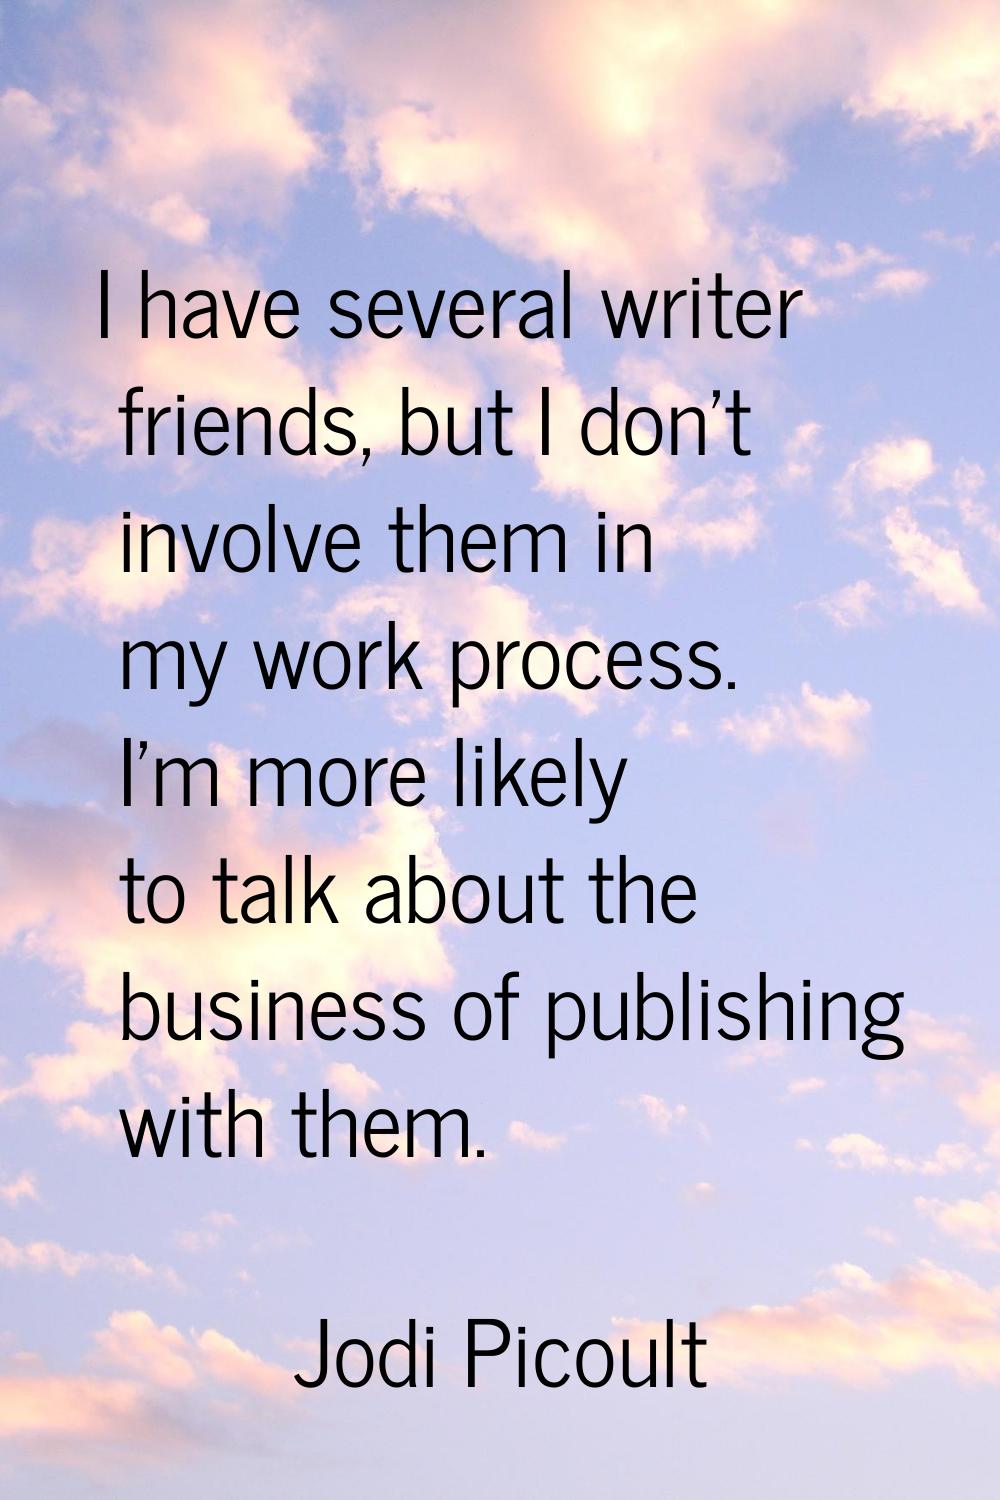 I have several writer friends, but I don't involve them in my work process. I'm more likely to talk